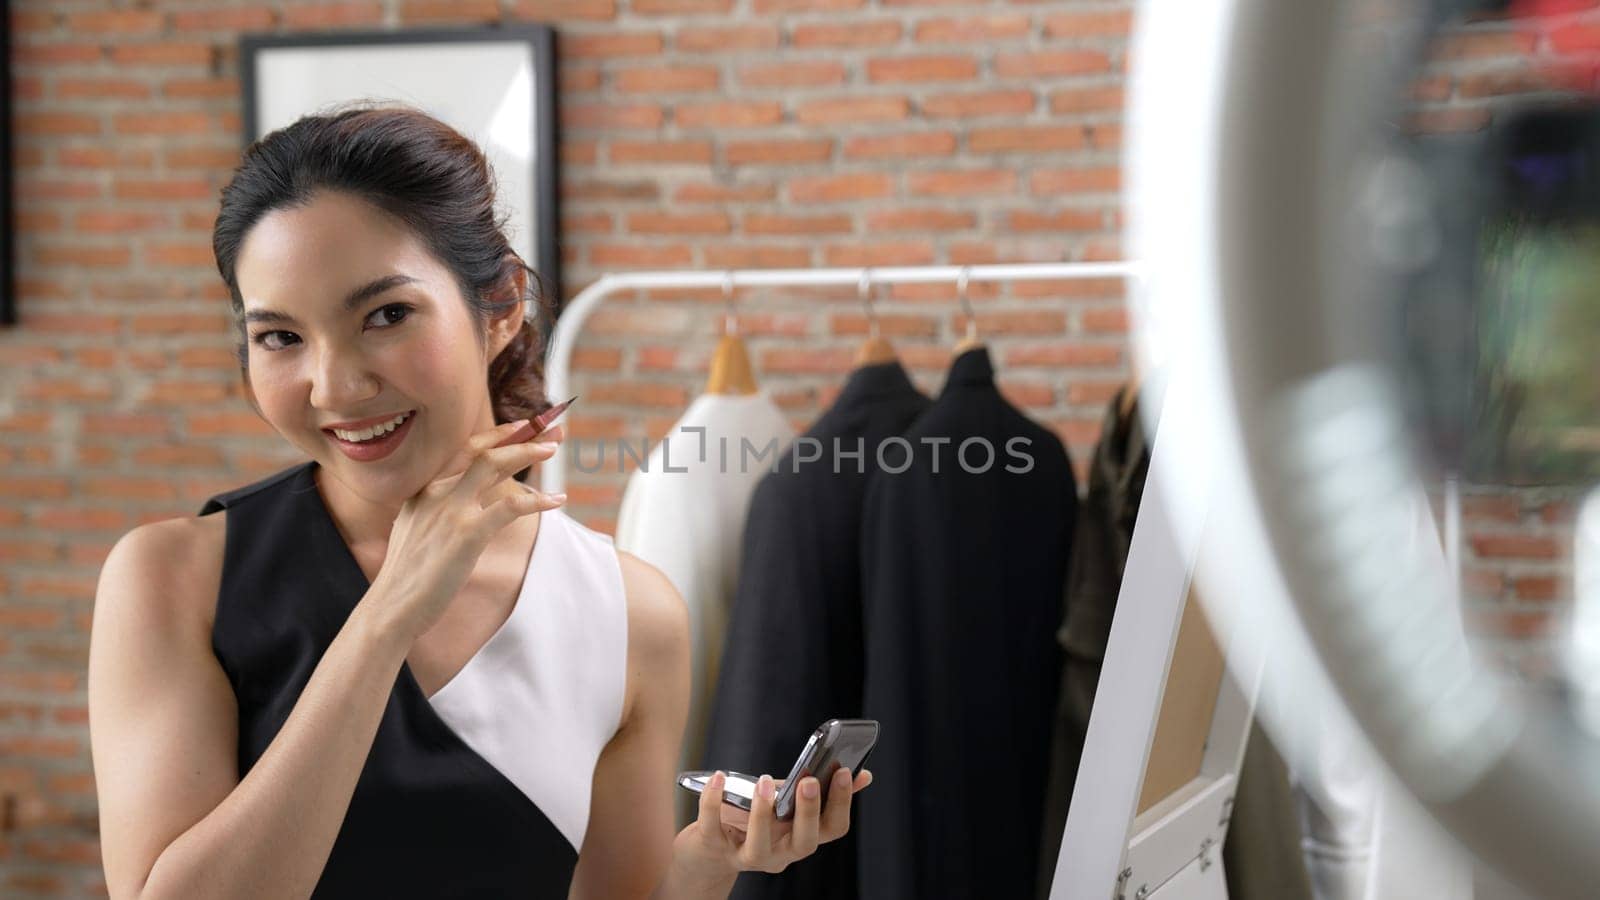 Woman influencer shoot live streaming vlog video review vivancy makeup social media or blog. Happy young girl with cosmetics studio lighting for marketing recording session broadcasting online.